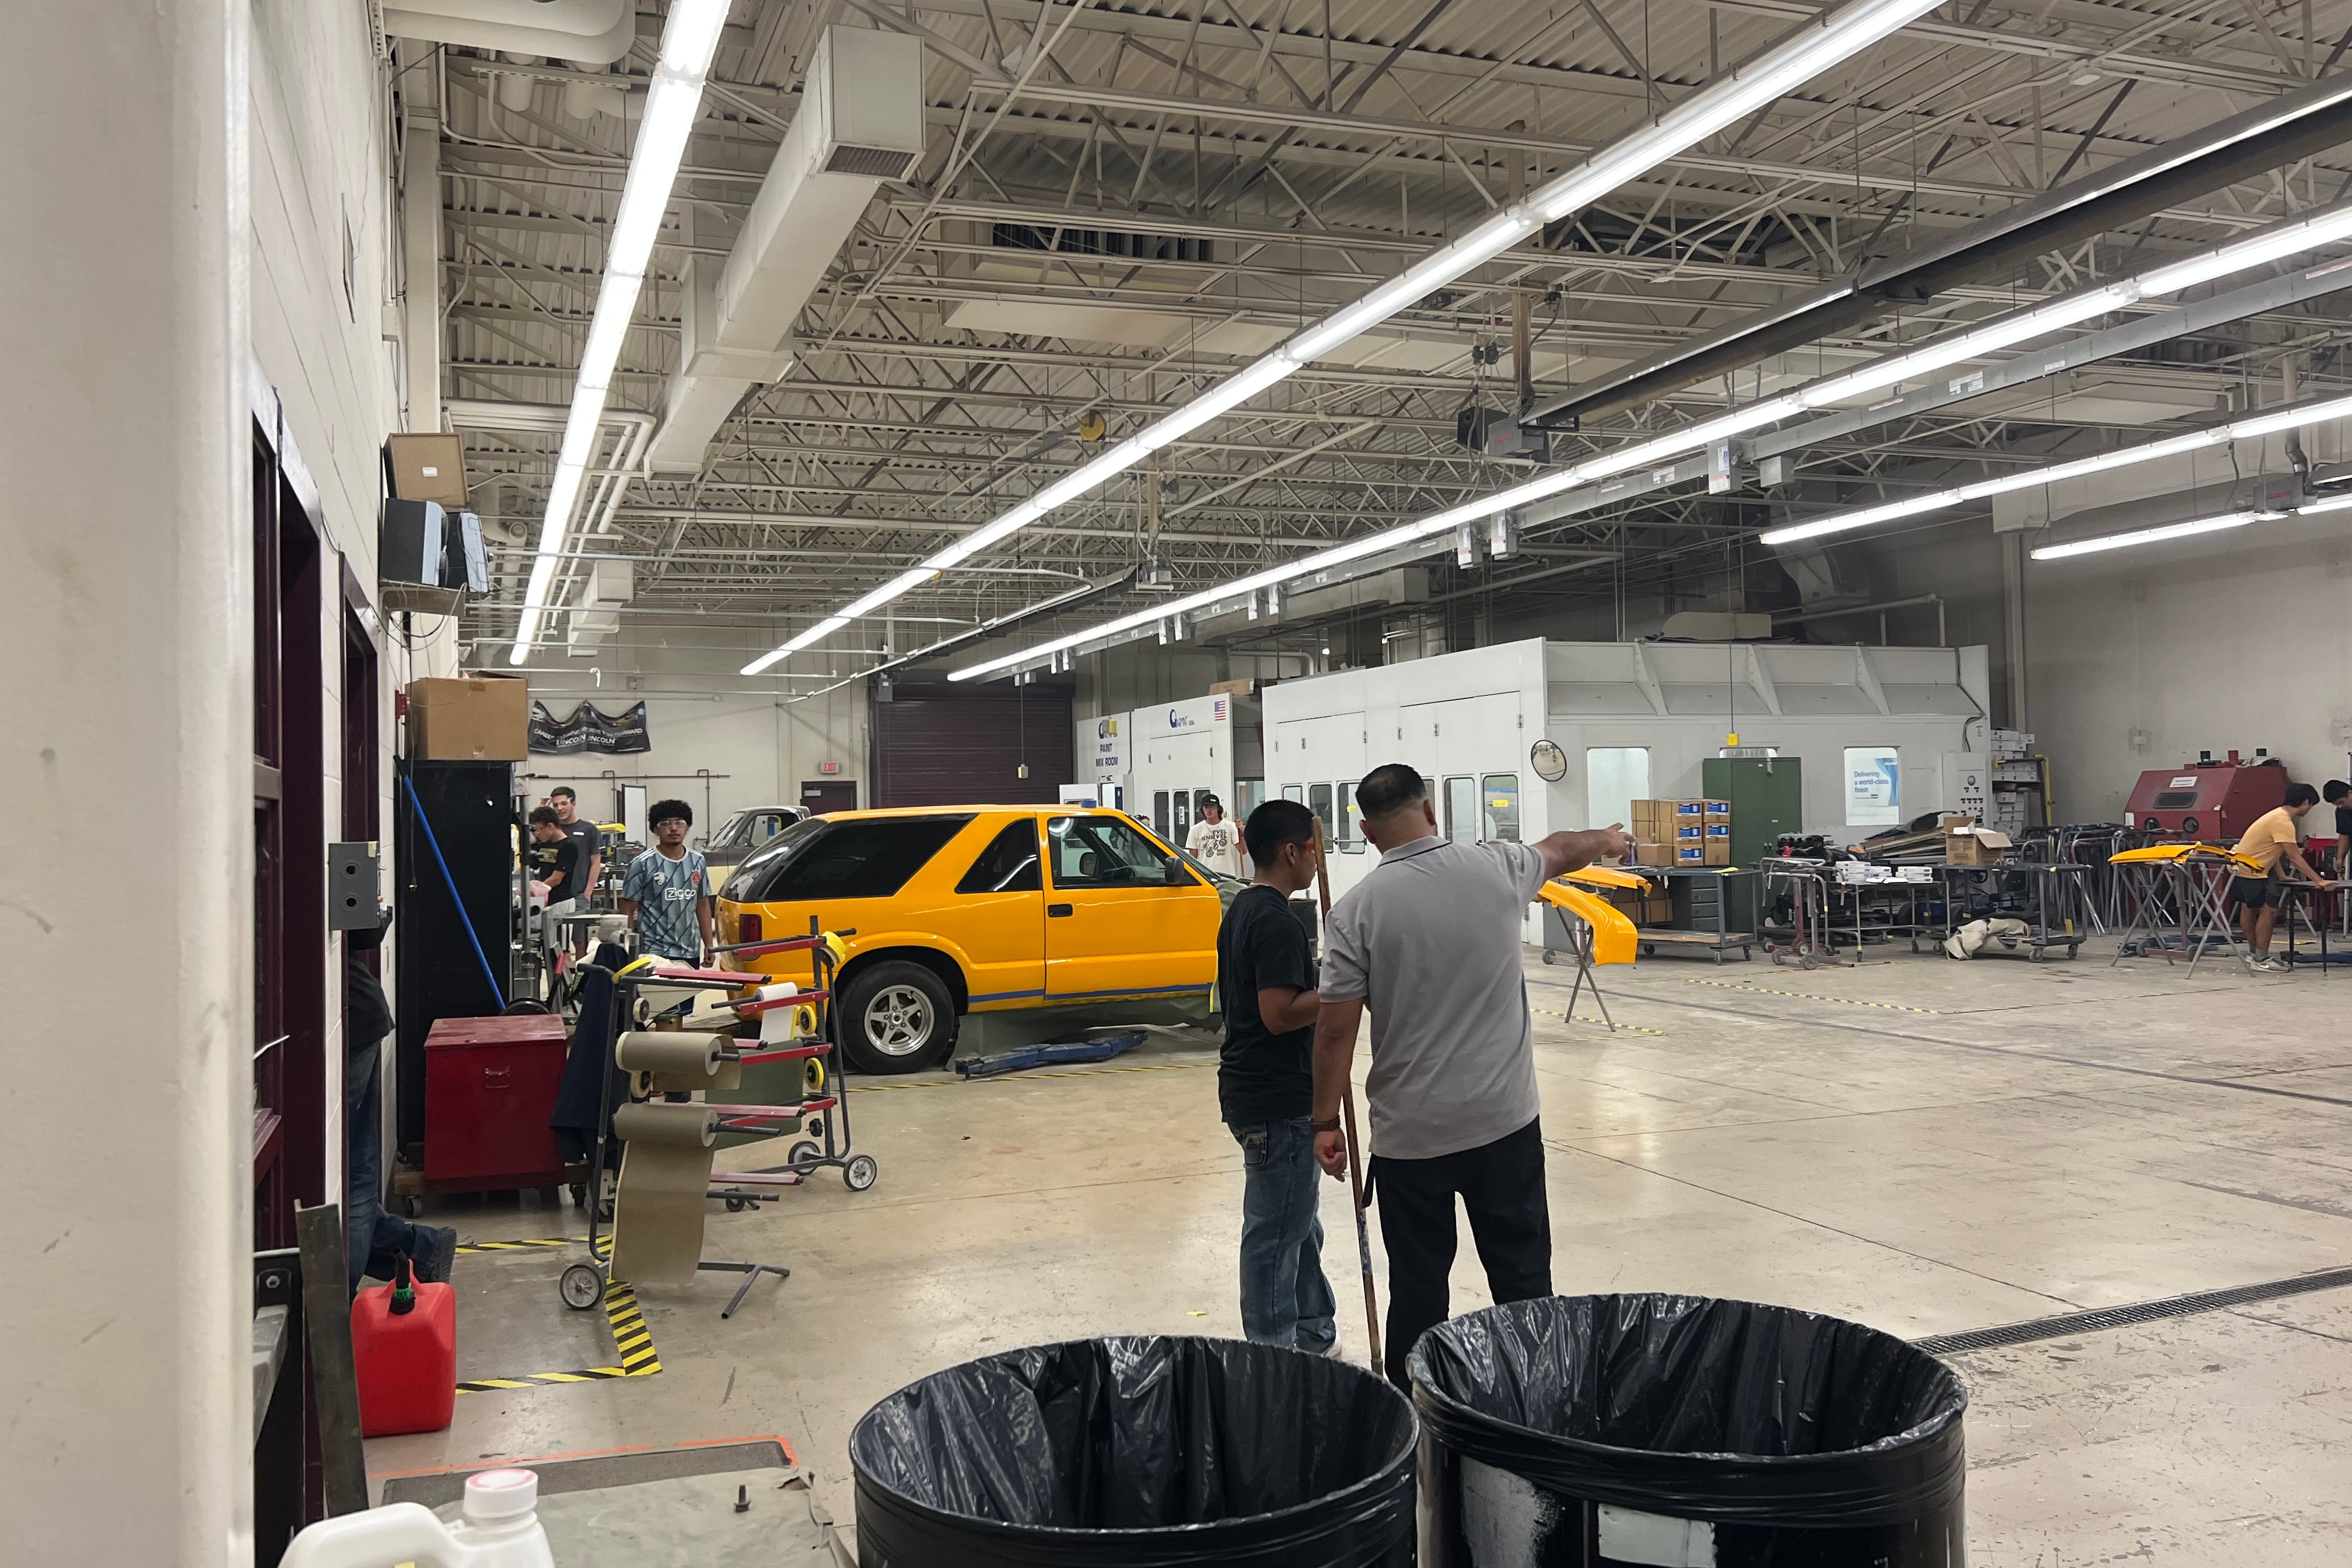 An instructor and student in an automotive garage. There is a yellow SUV in the background.